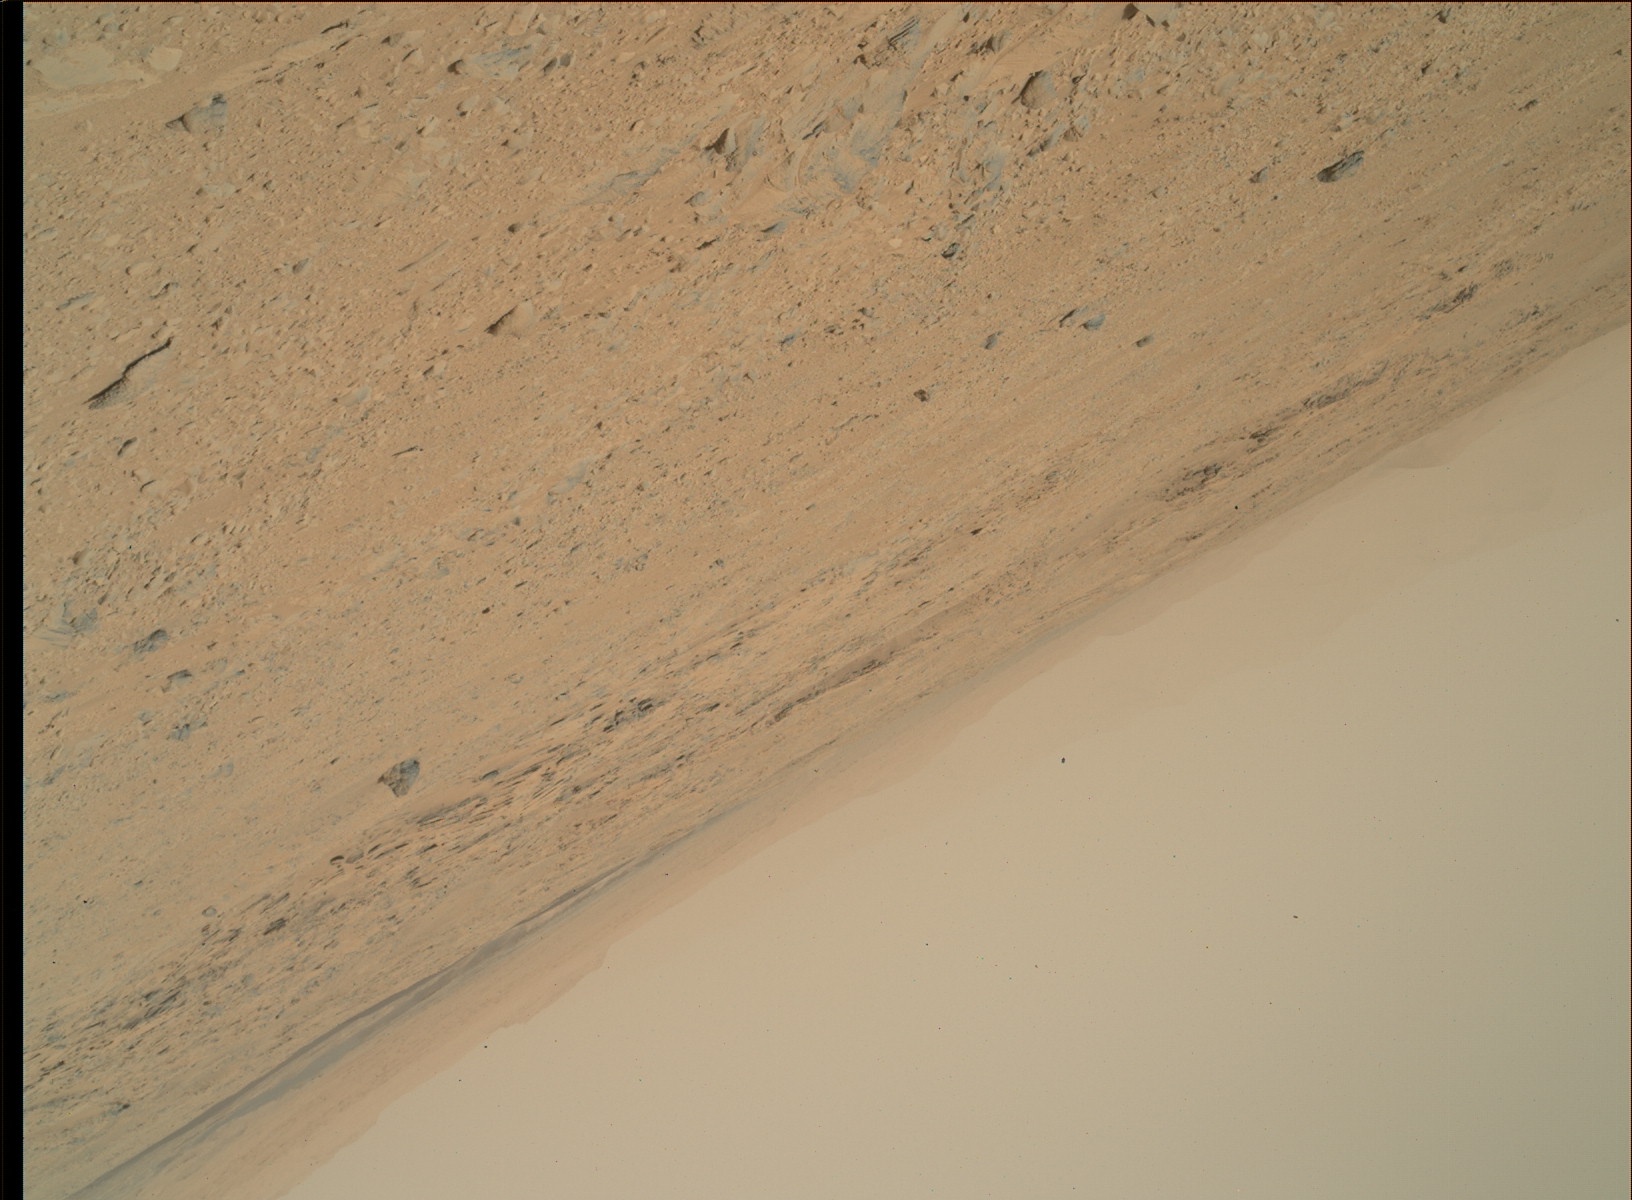 Nasa's Mars rover Curiosity acquired this image using its Mars Hand Lens Imager (MAHLI) on Sol 702